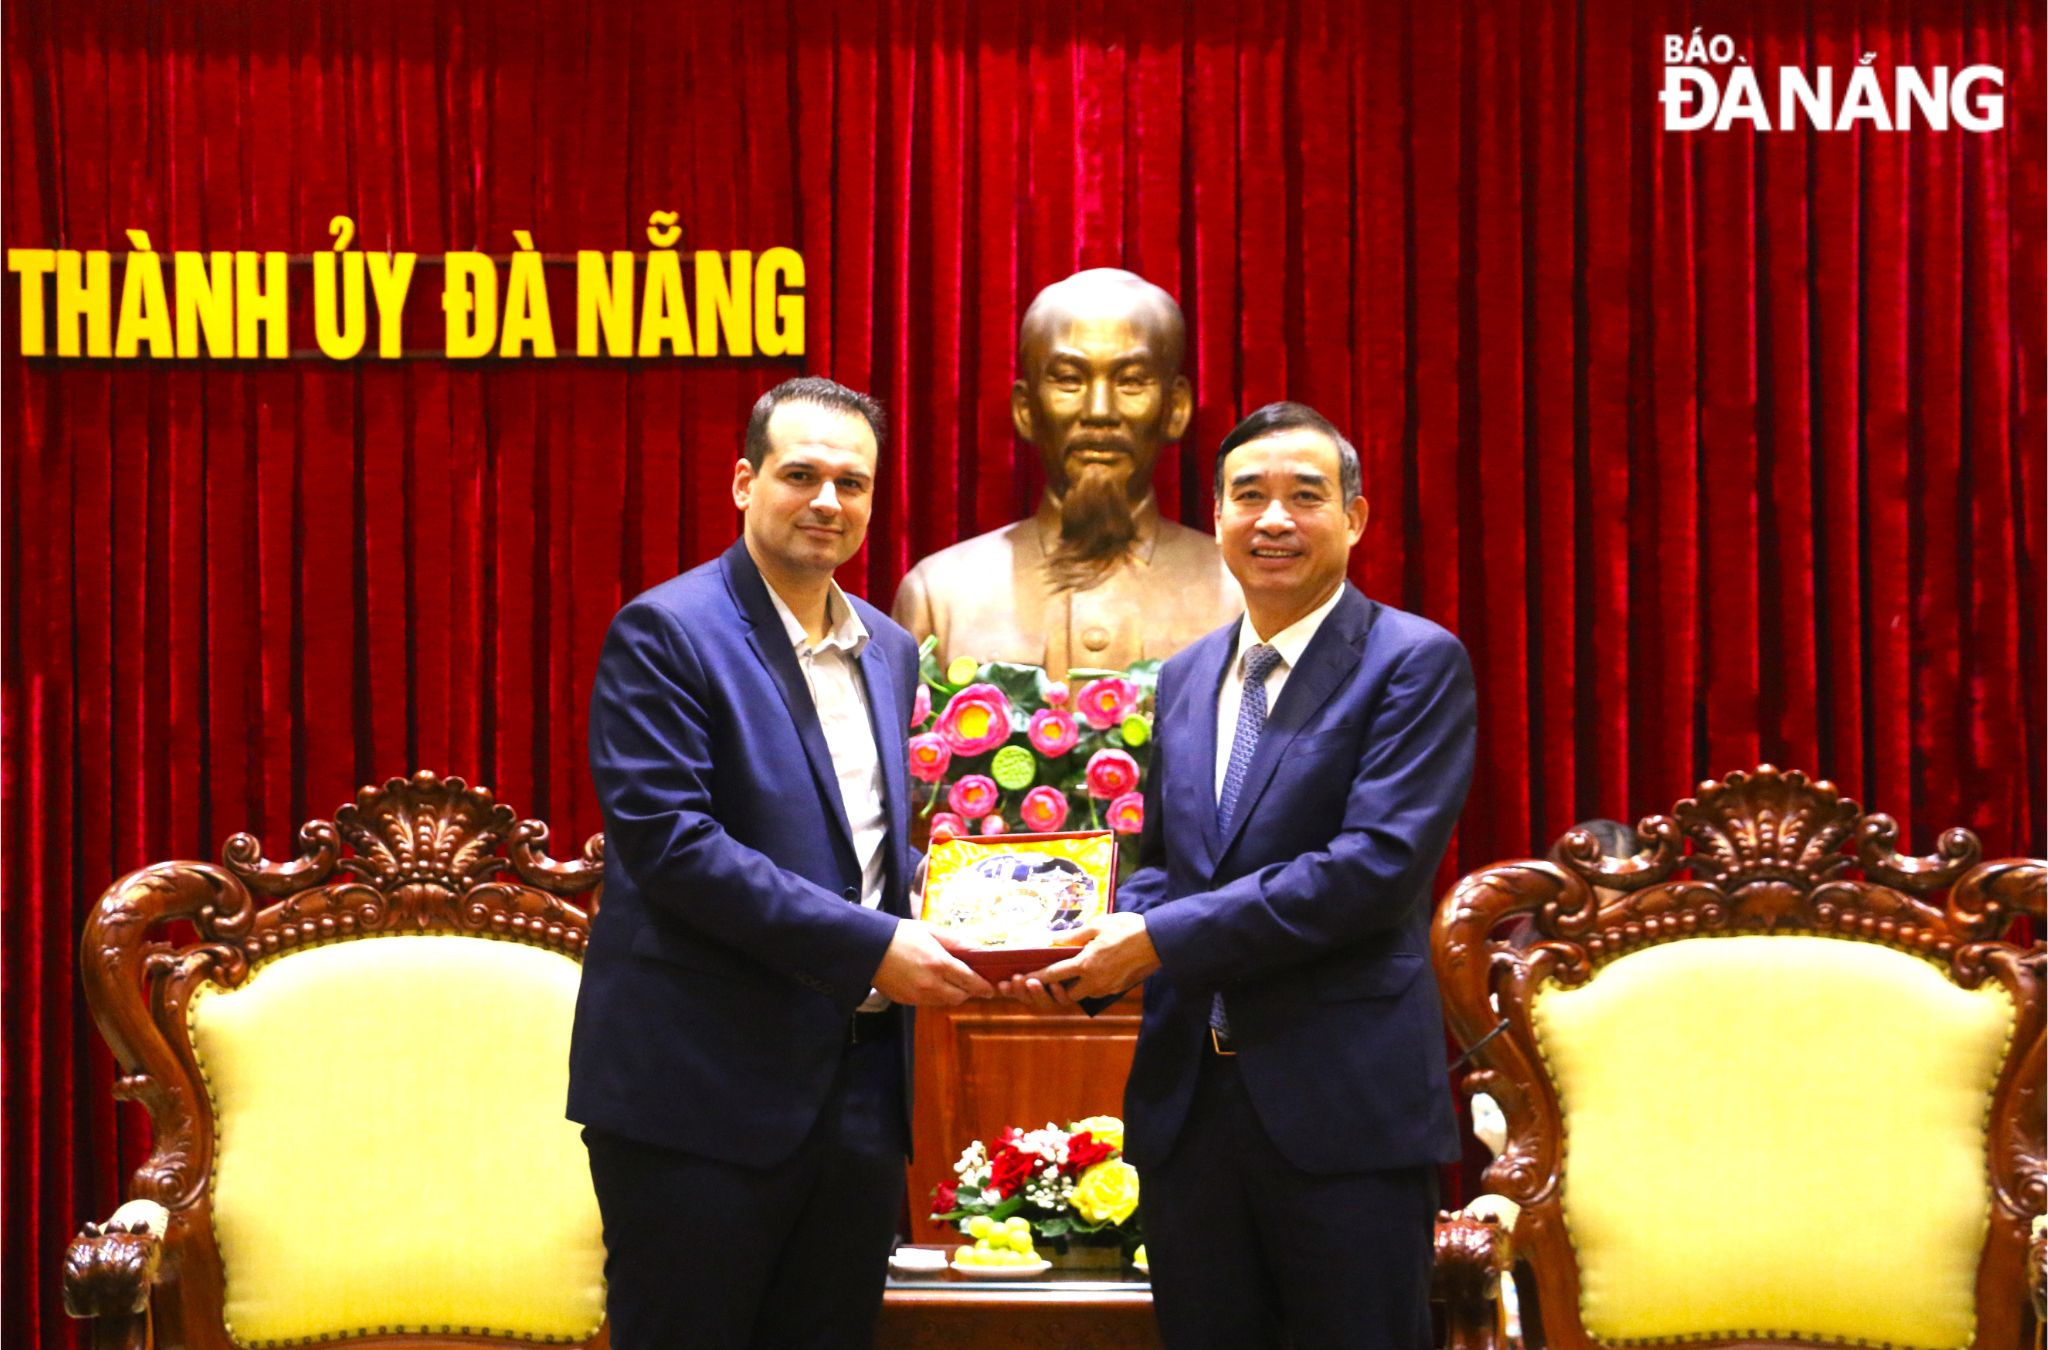 Da Nang People’s Committee Chairman Le Trung Chinh (right) and Senator Jeremy Bacchi who is a member of the National Council of the French Communist Party (PCF)